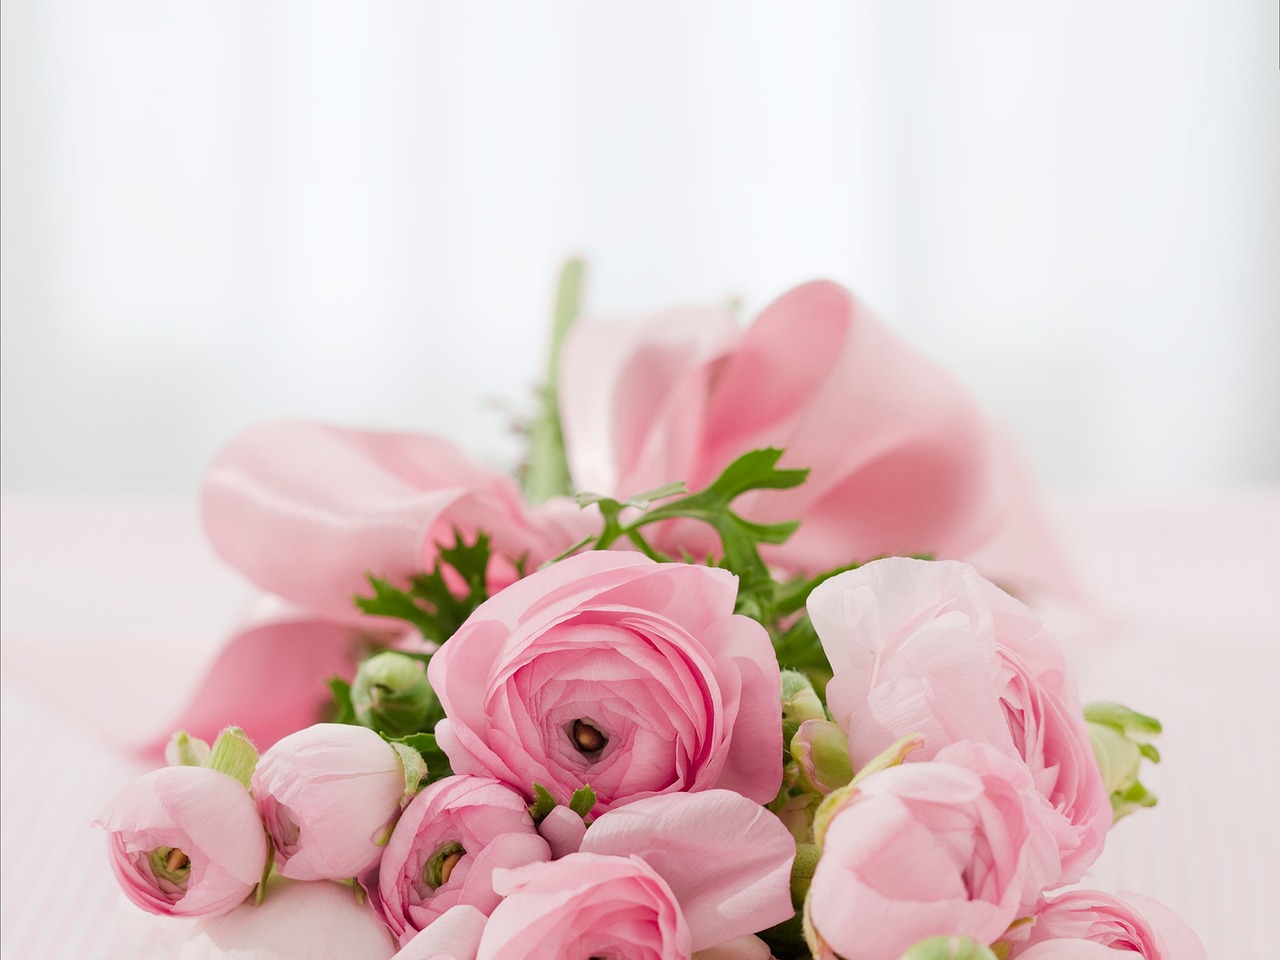 Roses - Trends, Meanings and Choosing the Perfect Bouquet